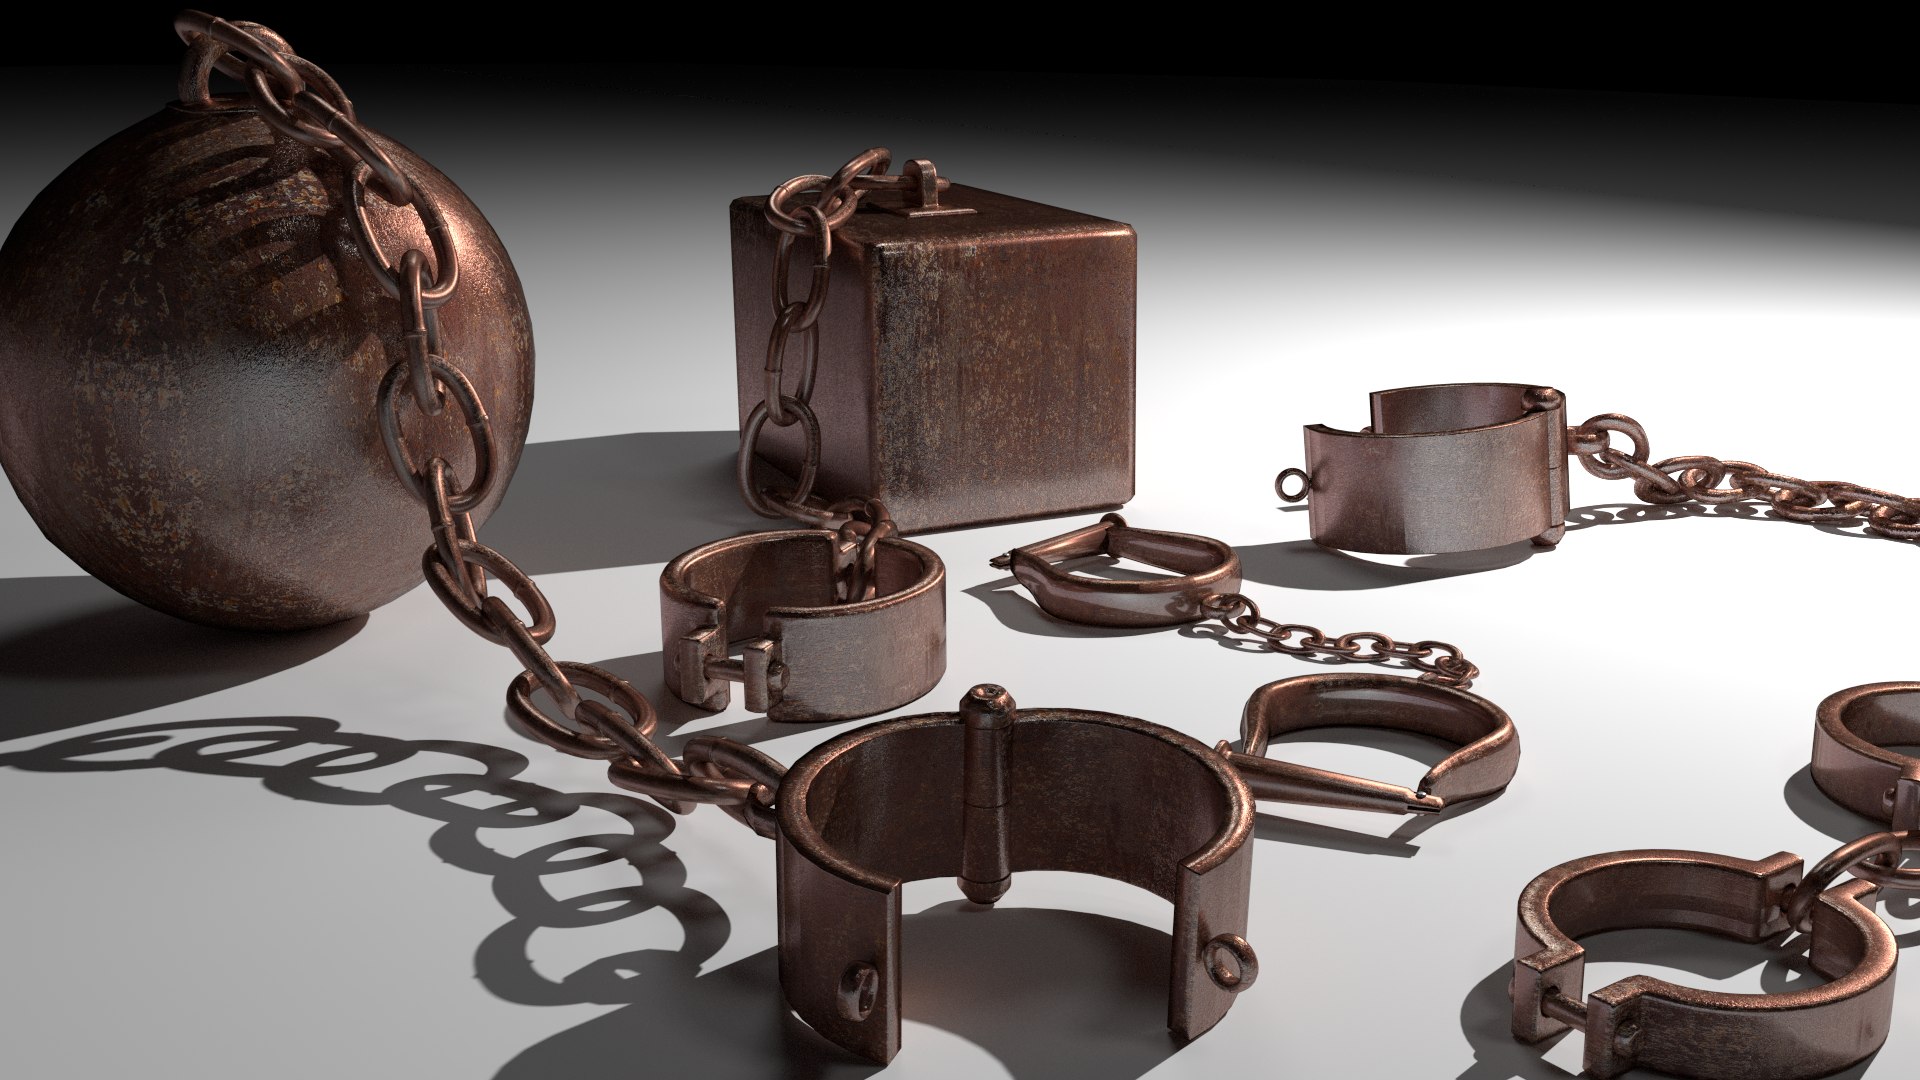 Prison Dungeon Ball and Chain Leg Shackles - ED2613 - Medieval Collectibles